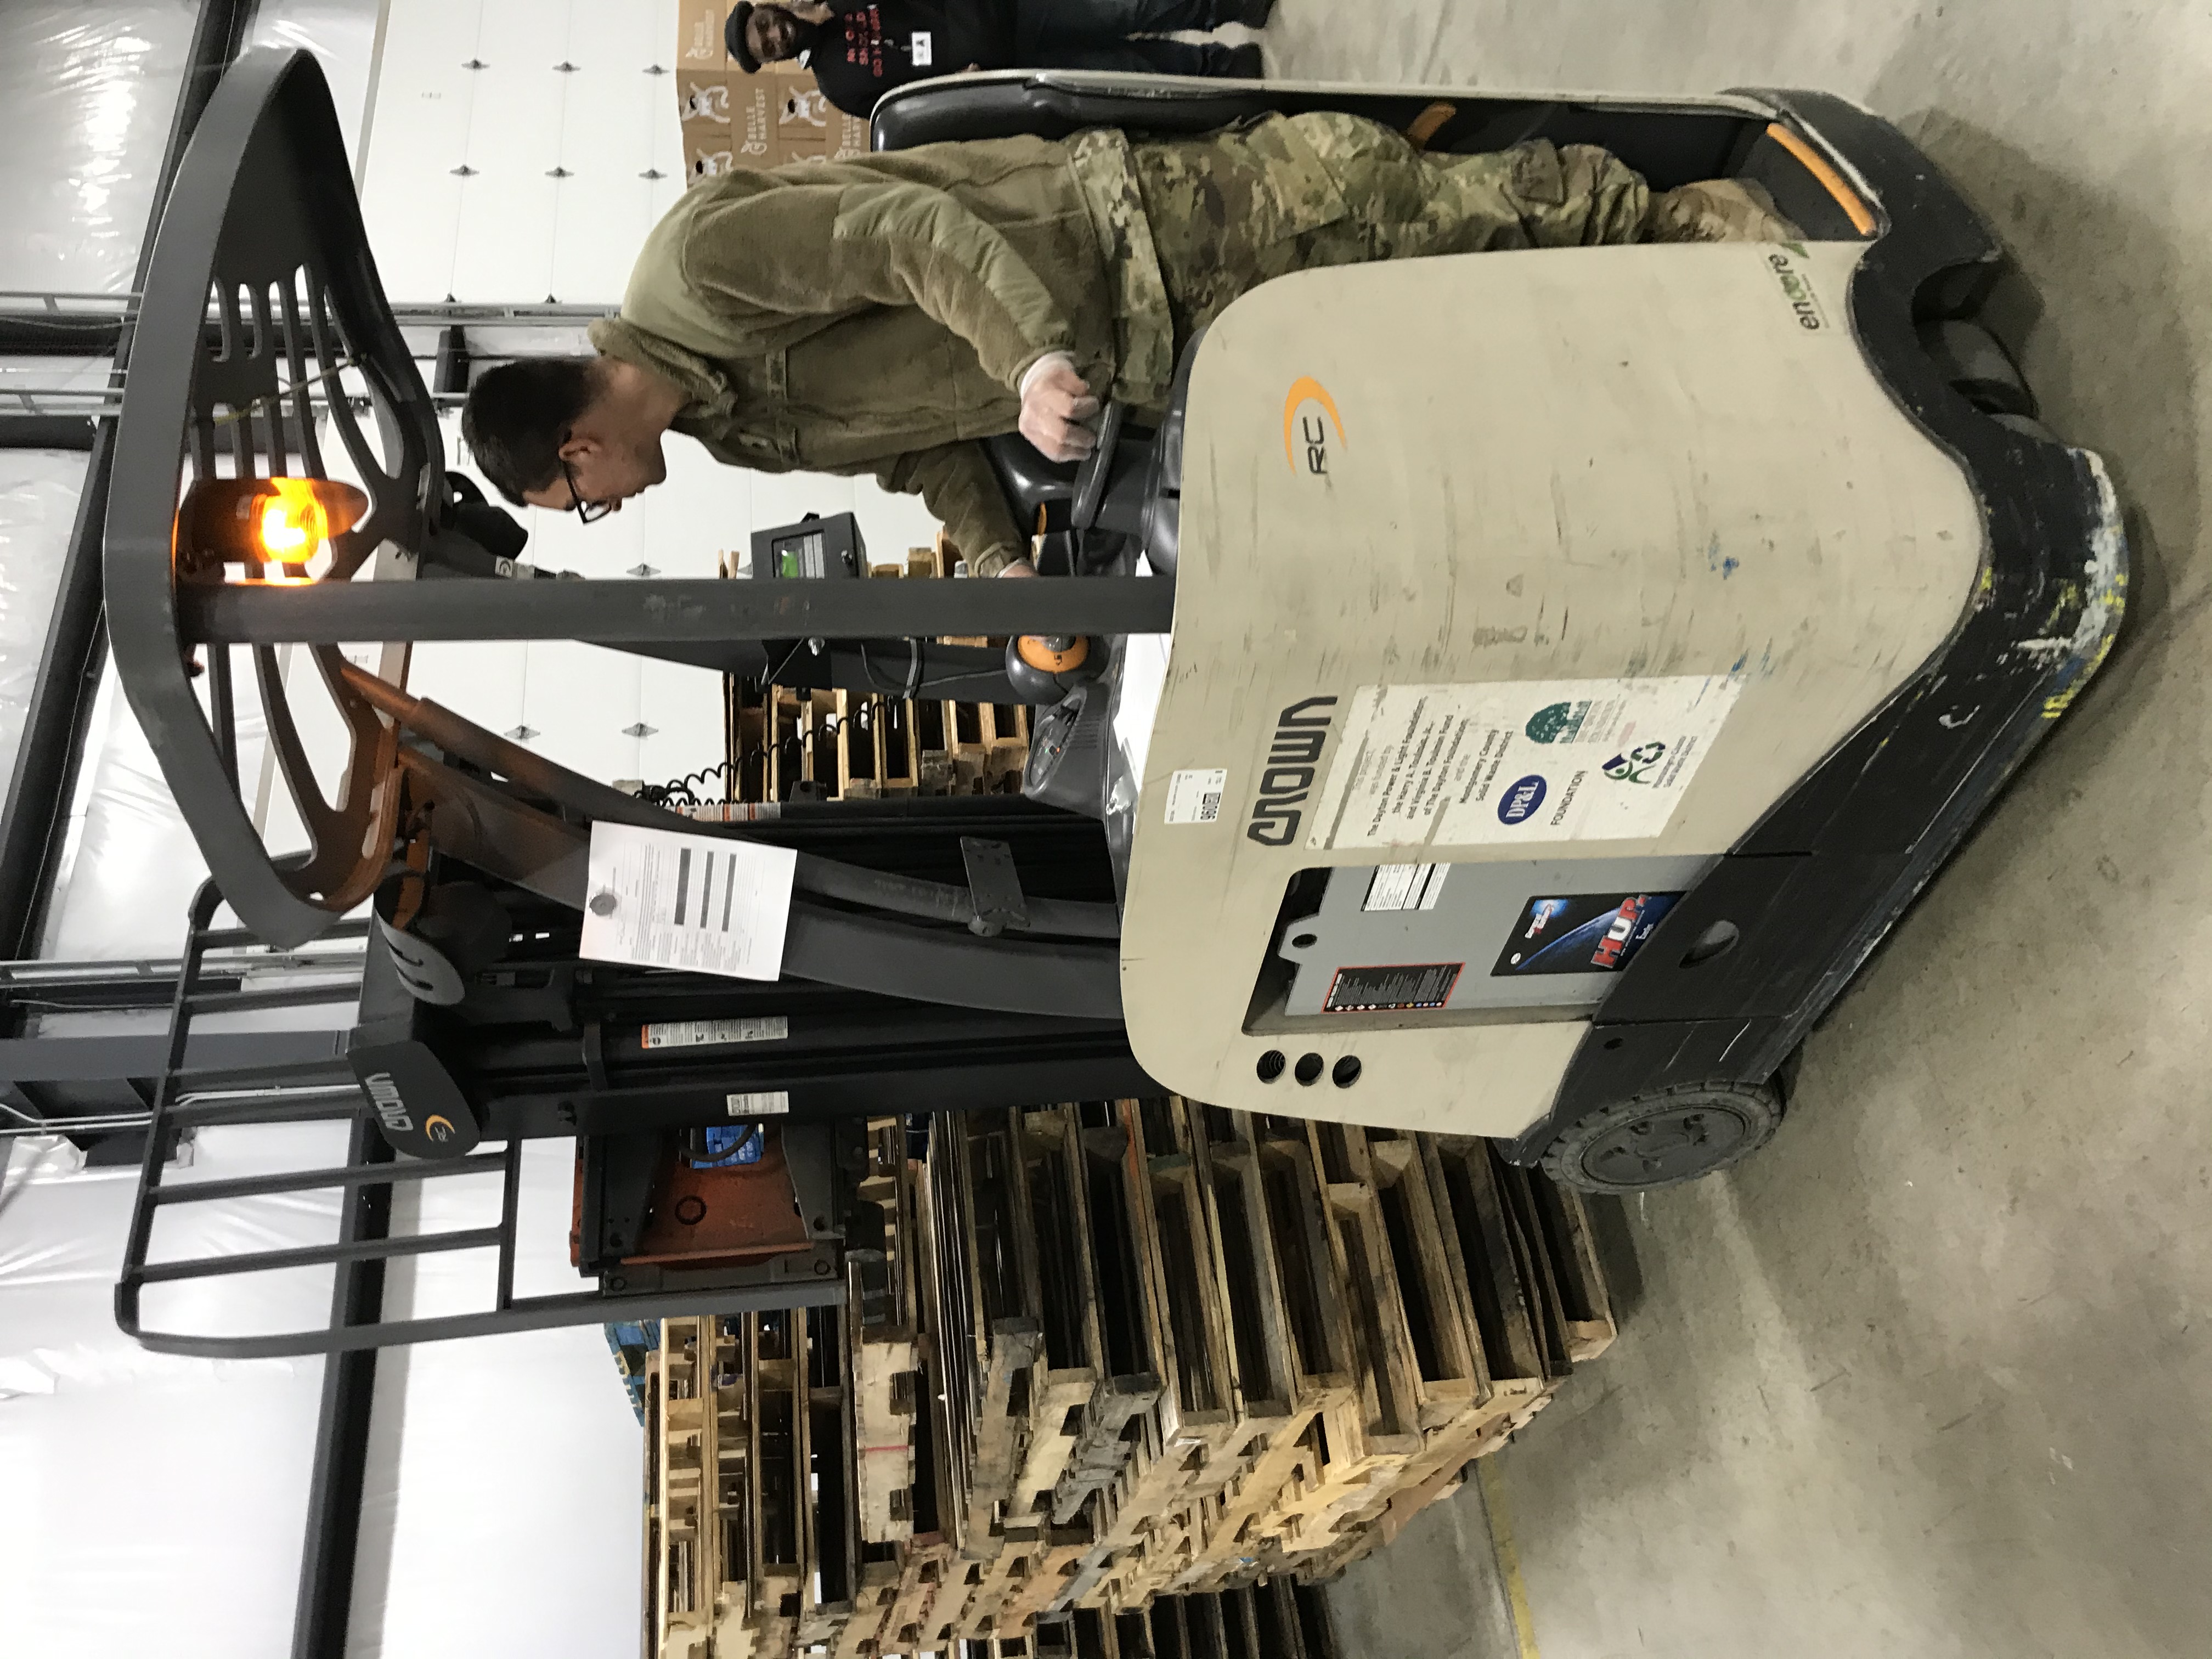 Soldier operates a forklift.